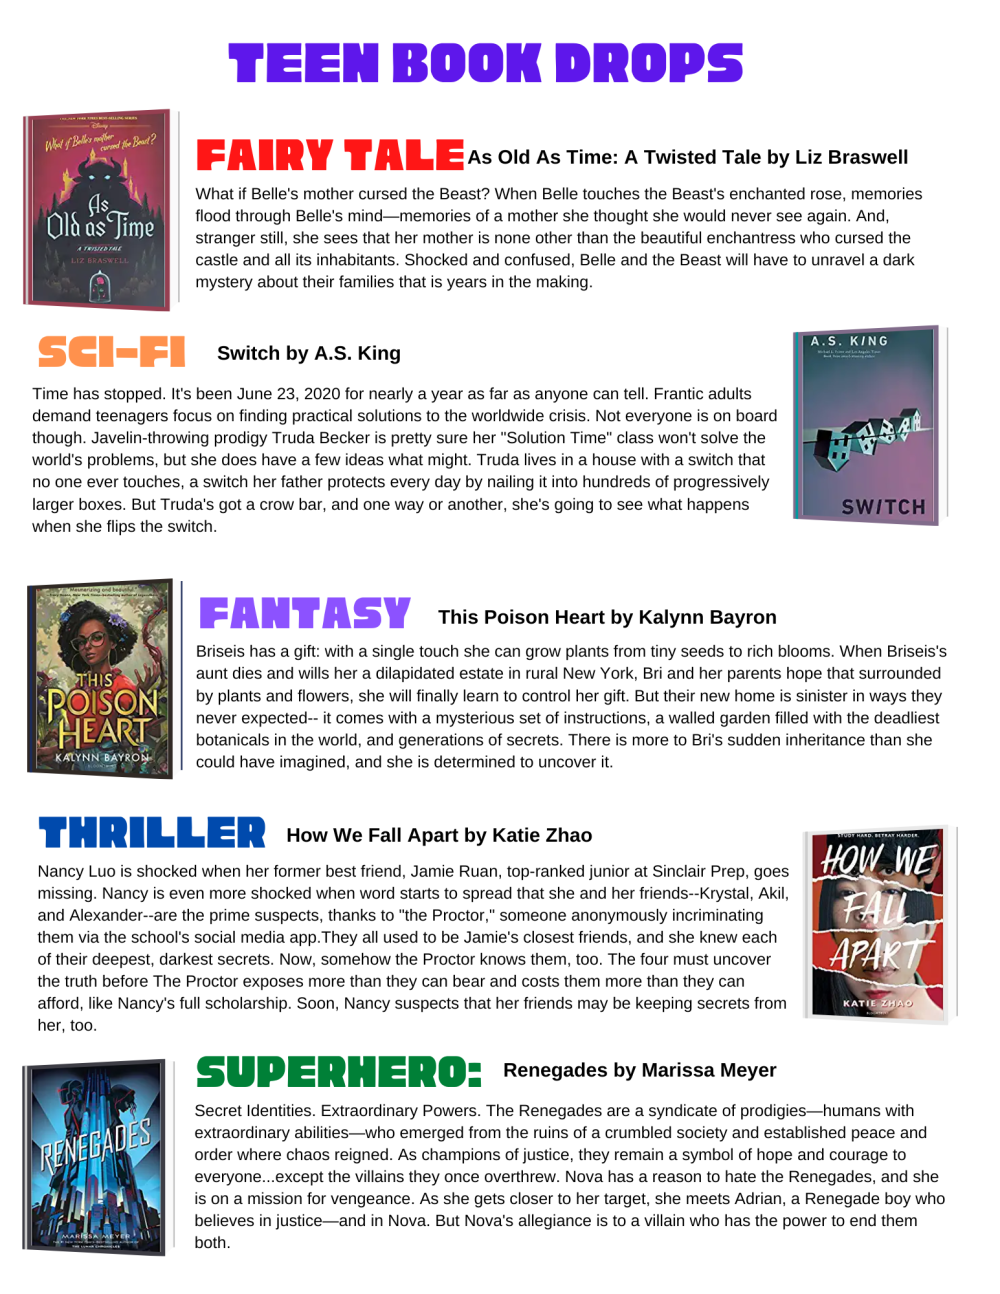 TBD winter books picks include: Fairytale: As Old as Time, Fantasy: This Poison Heart, Science Fiction: Switch, Thriller: How We Fall Apart, and Superhero: Renegades.